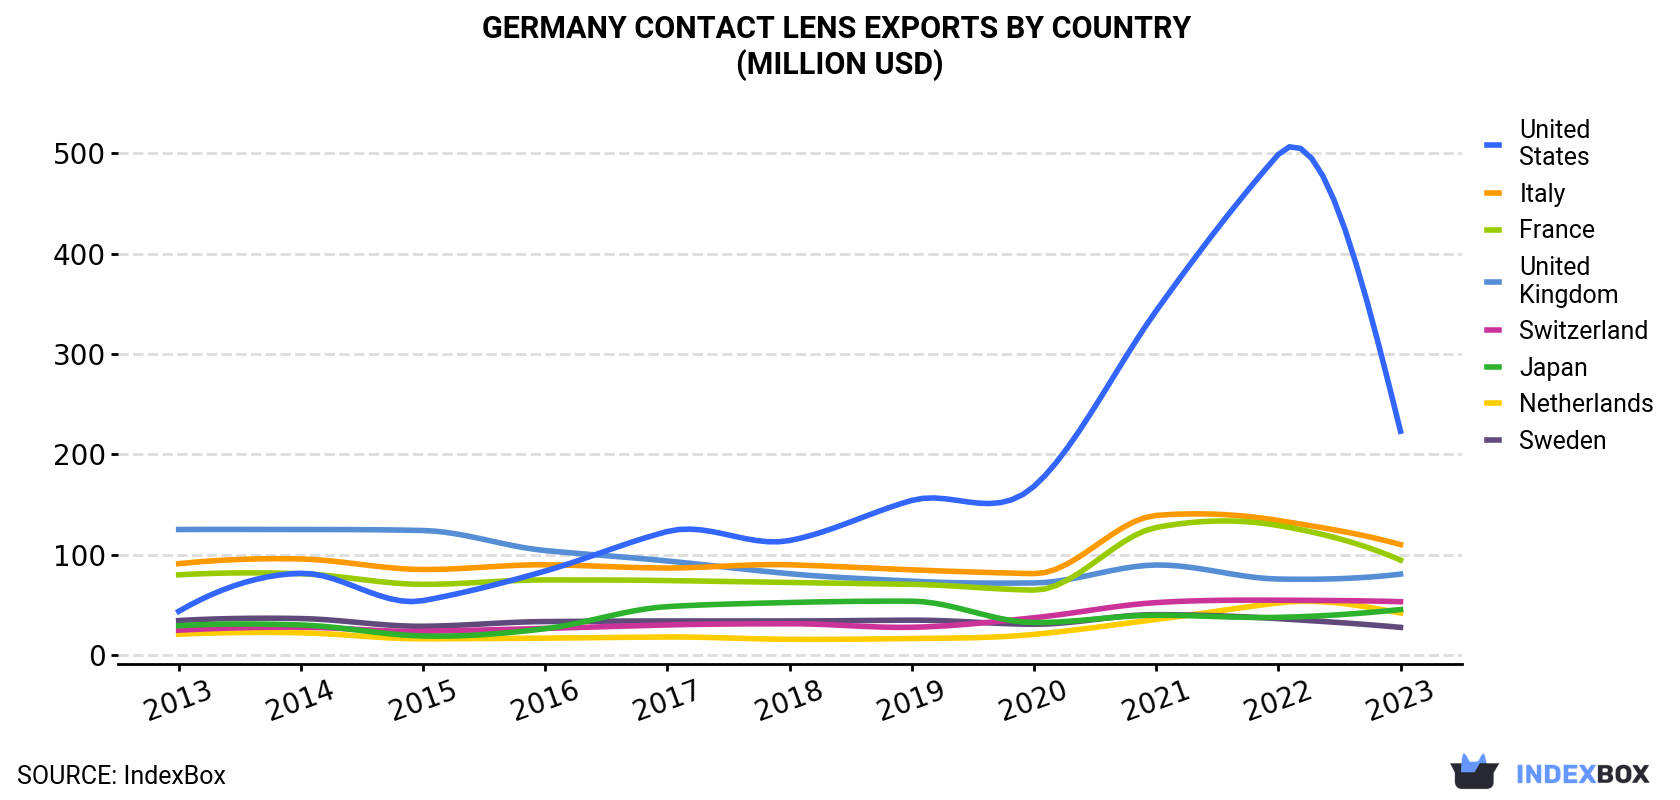 Germany Contact Lens Exports By Country (Million USD)